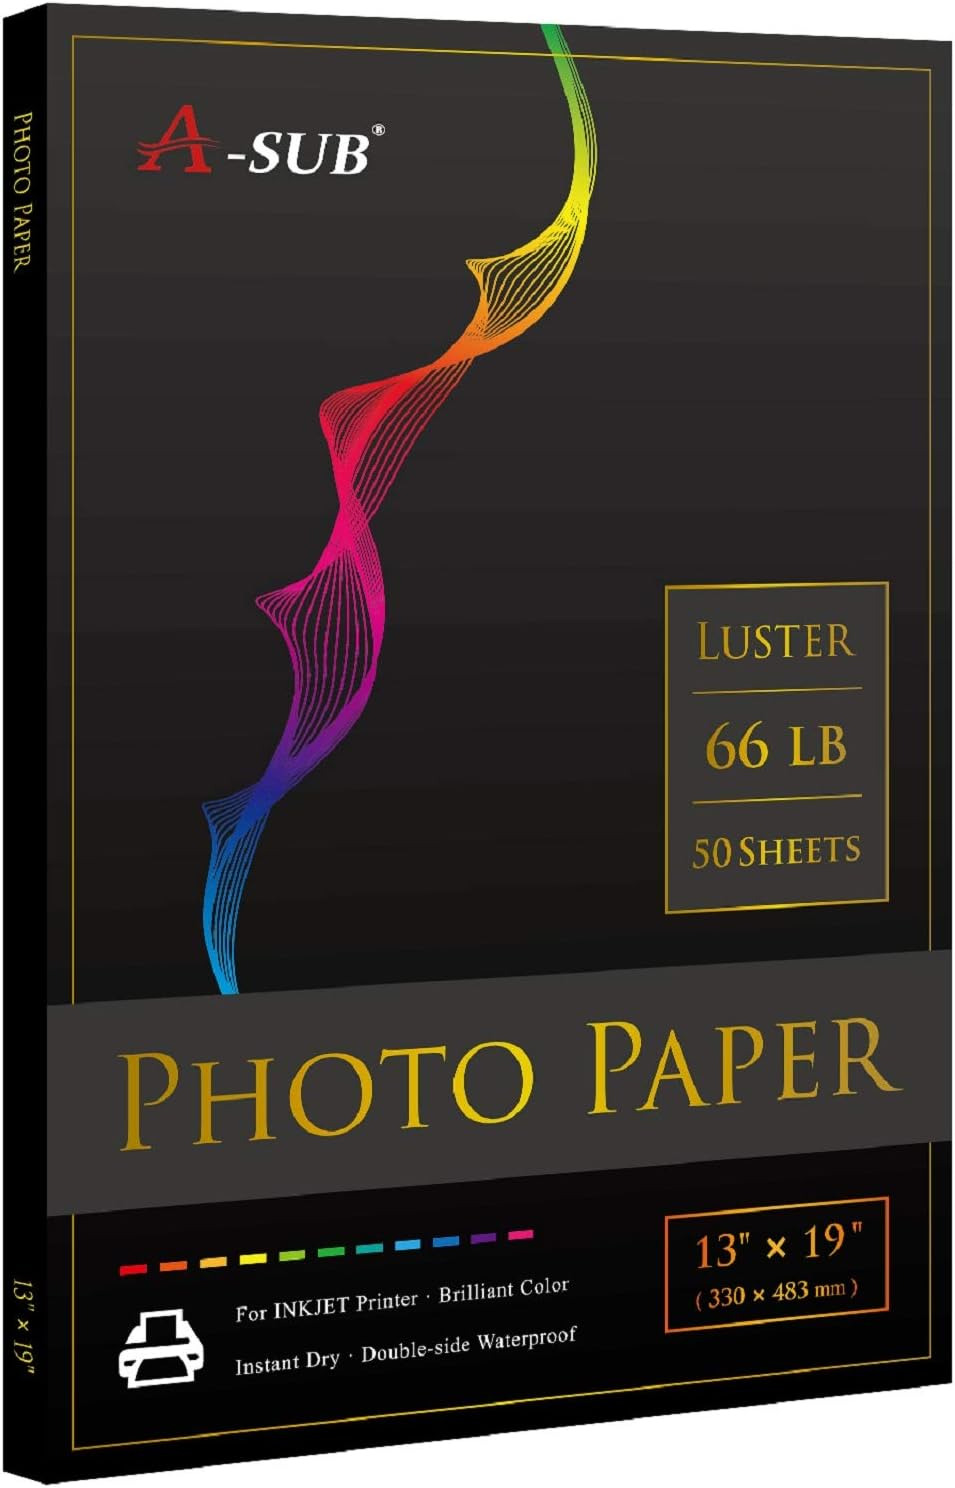 A-SUB Premium Photo Paper Luster 13X19 Inch 66Lb for Inkjet Printers 50 Sheets, 